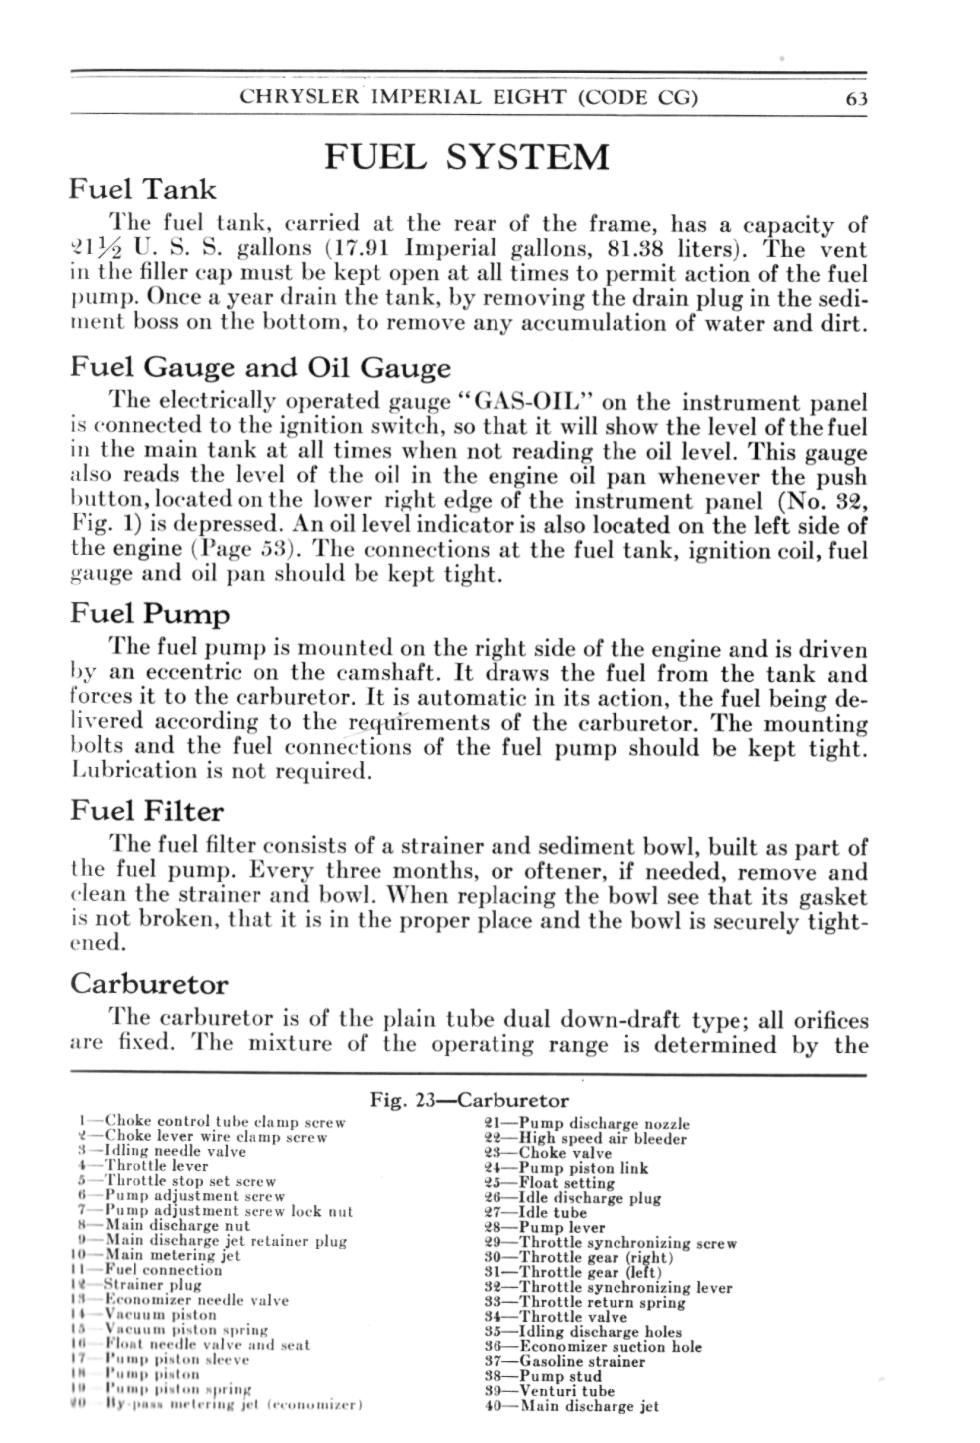 1931 Chrysler Imperial Owners Manual Page 24